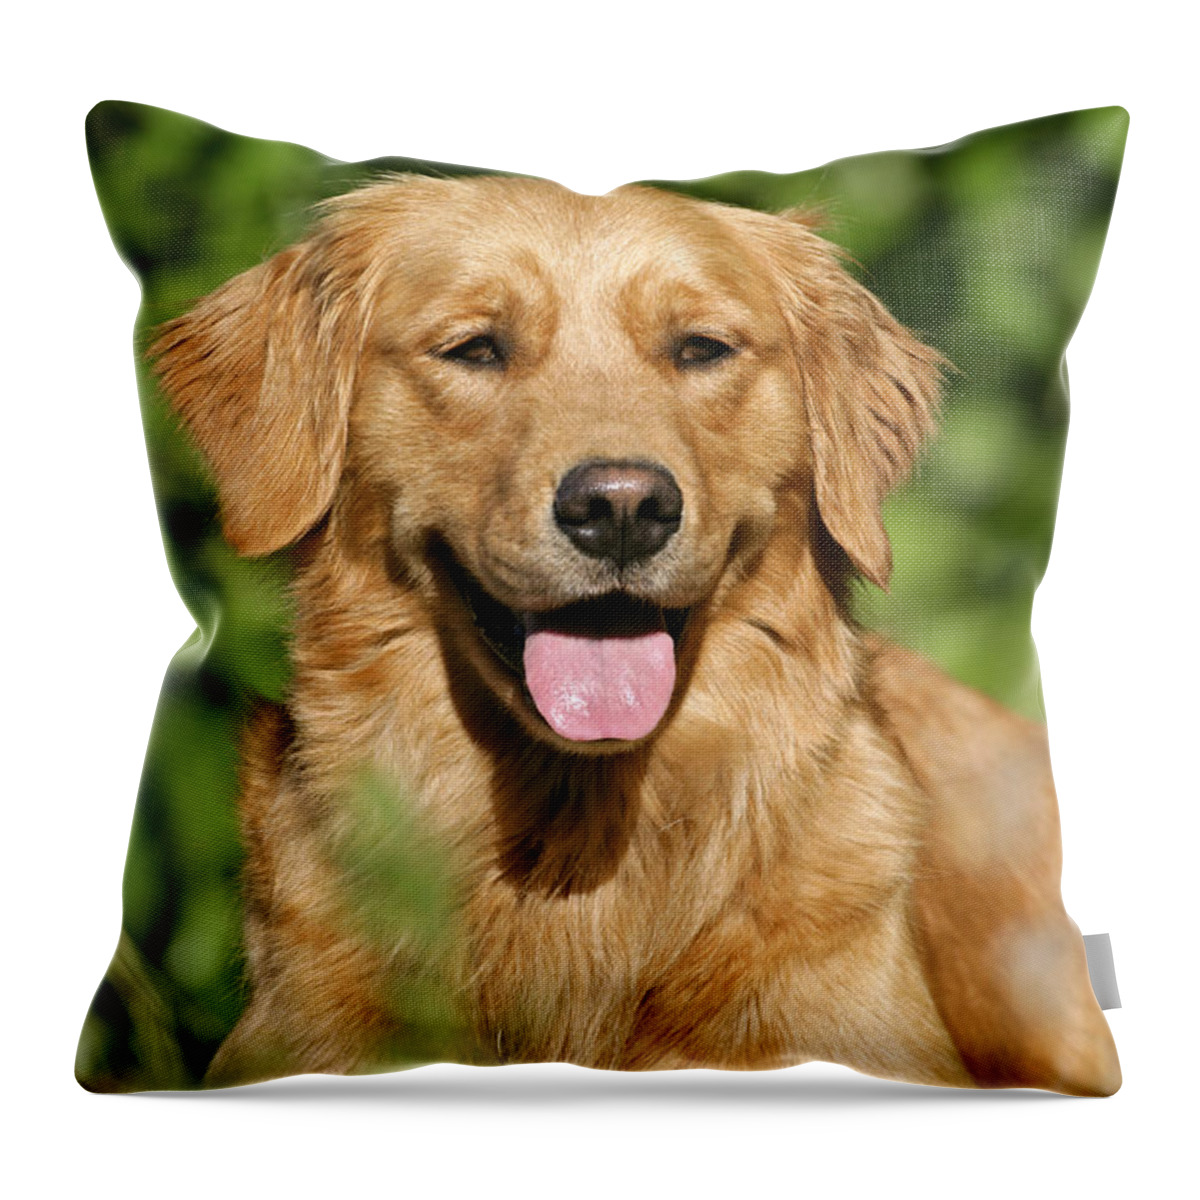 Dog Throw Pillow featuring the photograph Golden Retriever by Rolf Kopfle